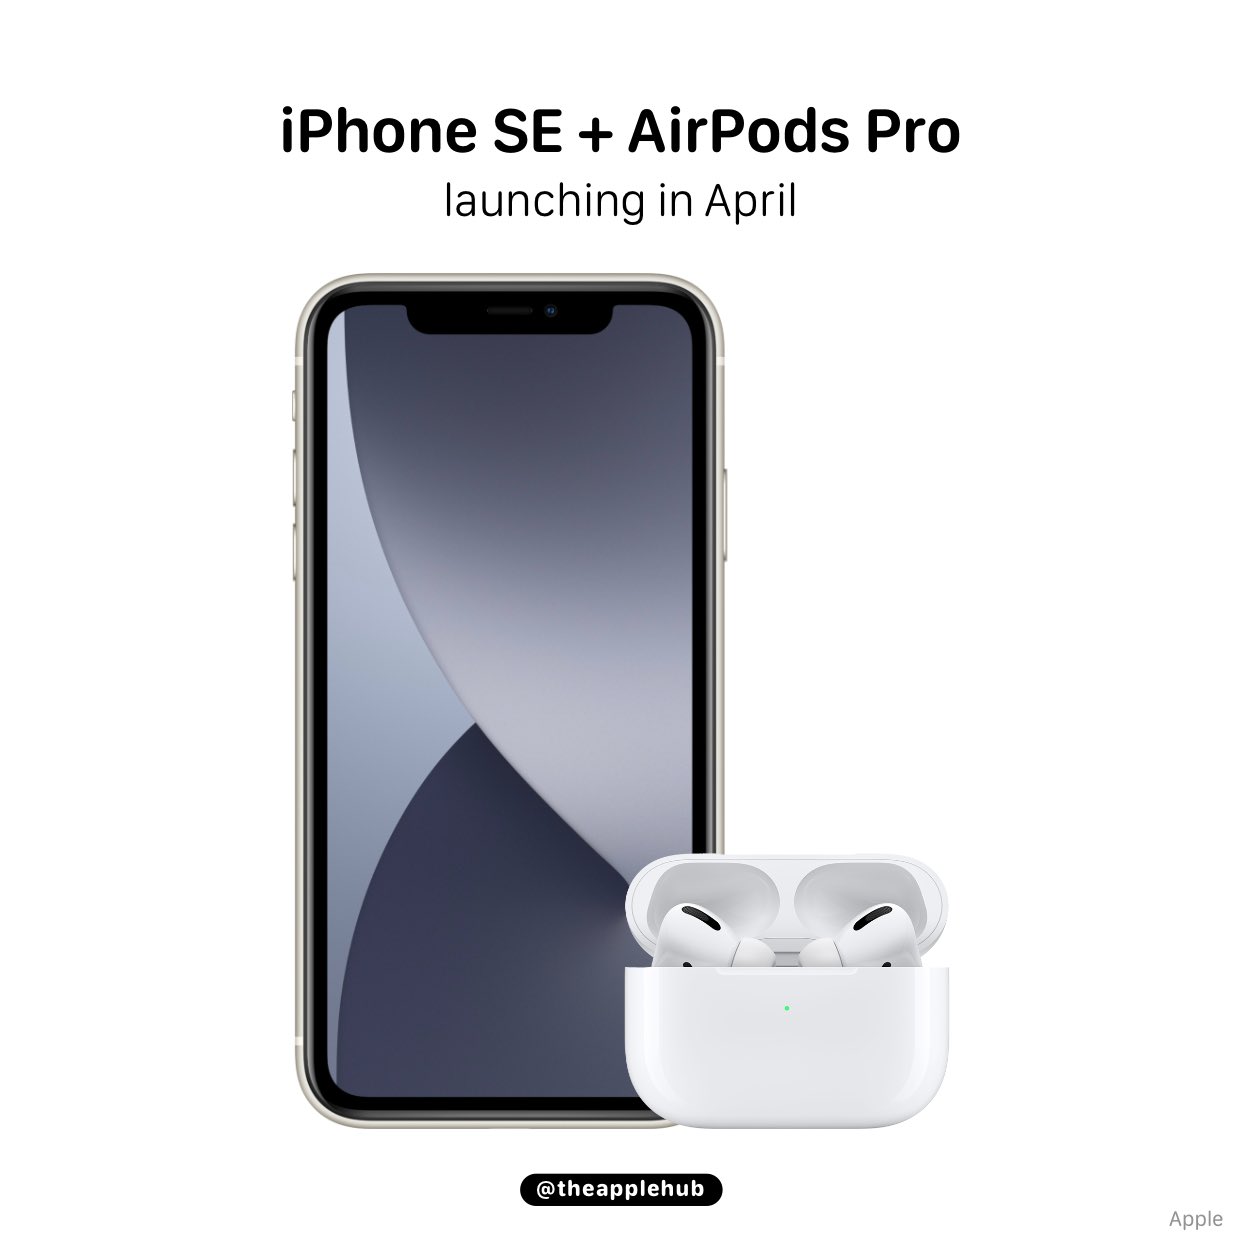 Apple Hub Twitter: "Mac Otakara also reports that Apple will launch 2nd gen AirPods Pro and a 3rd gen SE in April. new AirPods Pro will reportedly have an